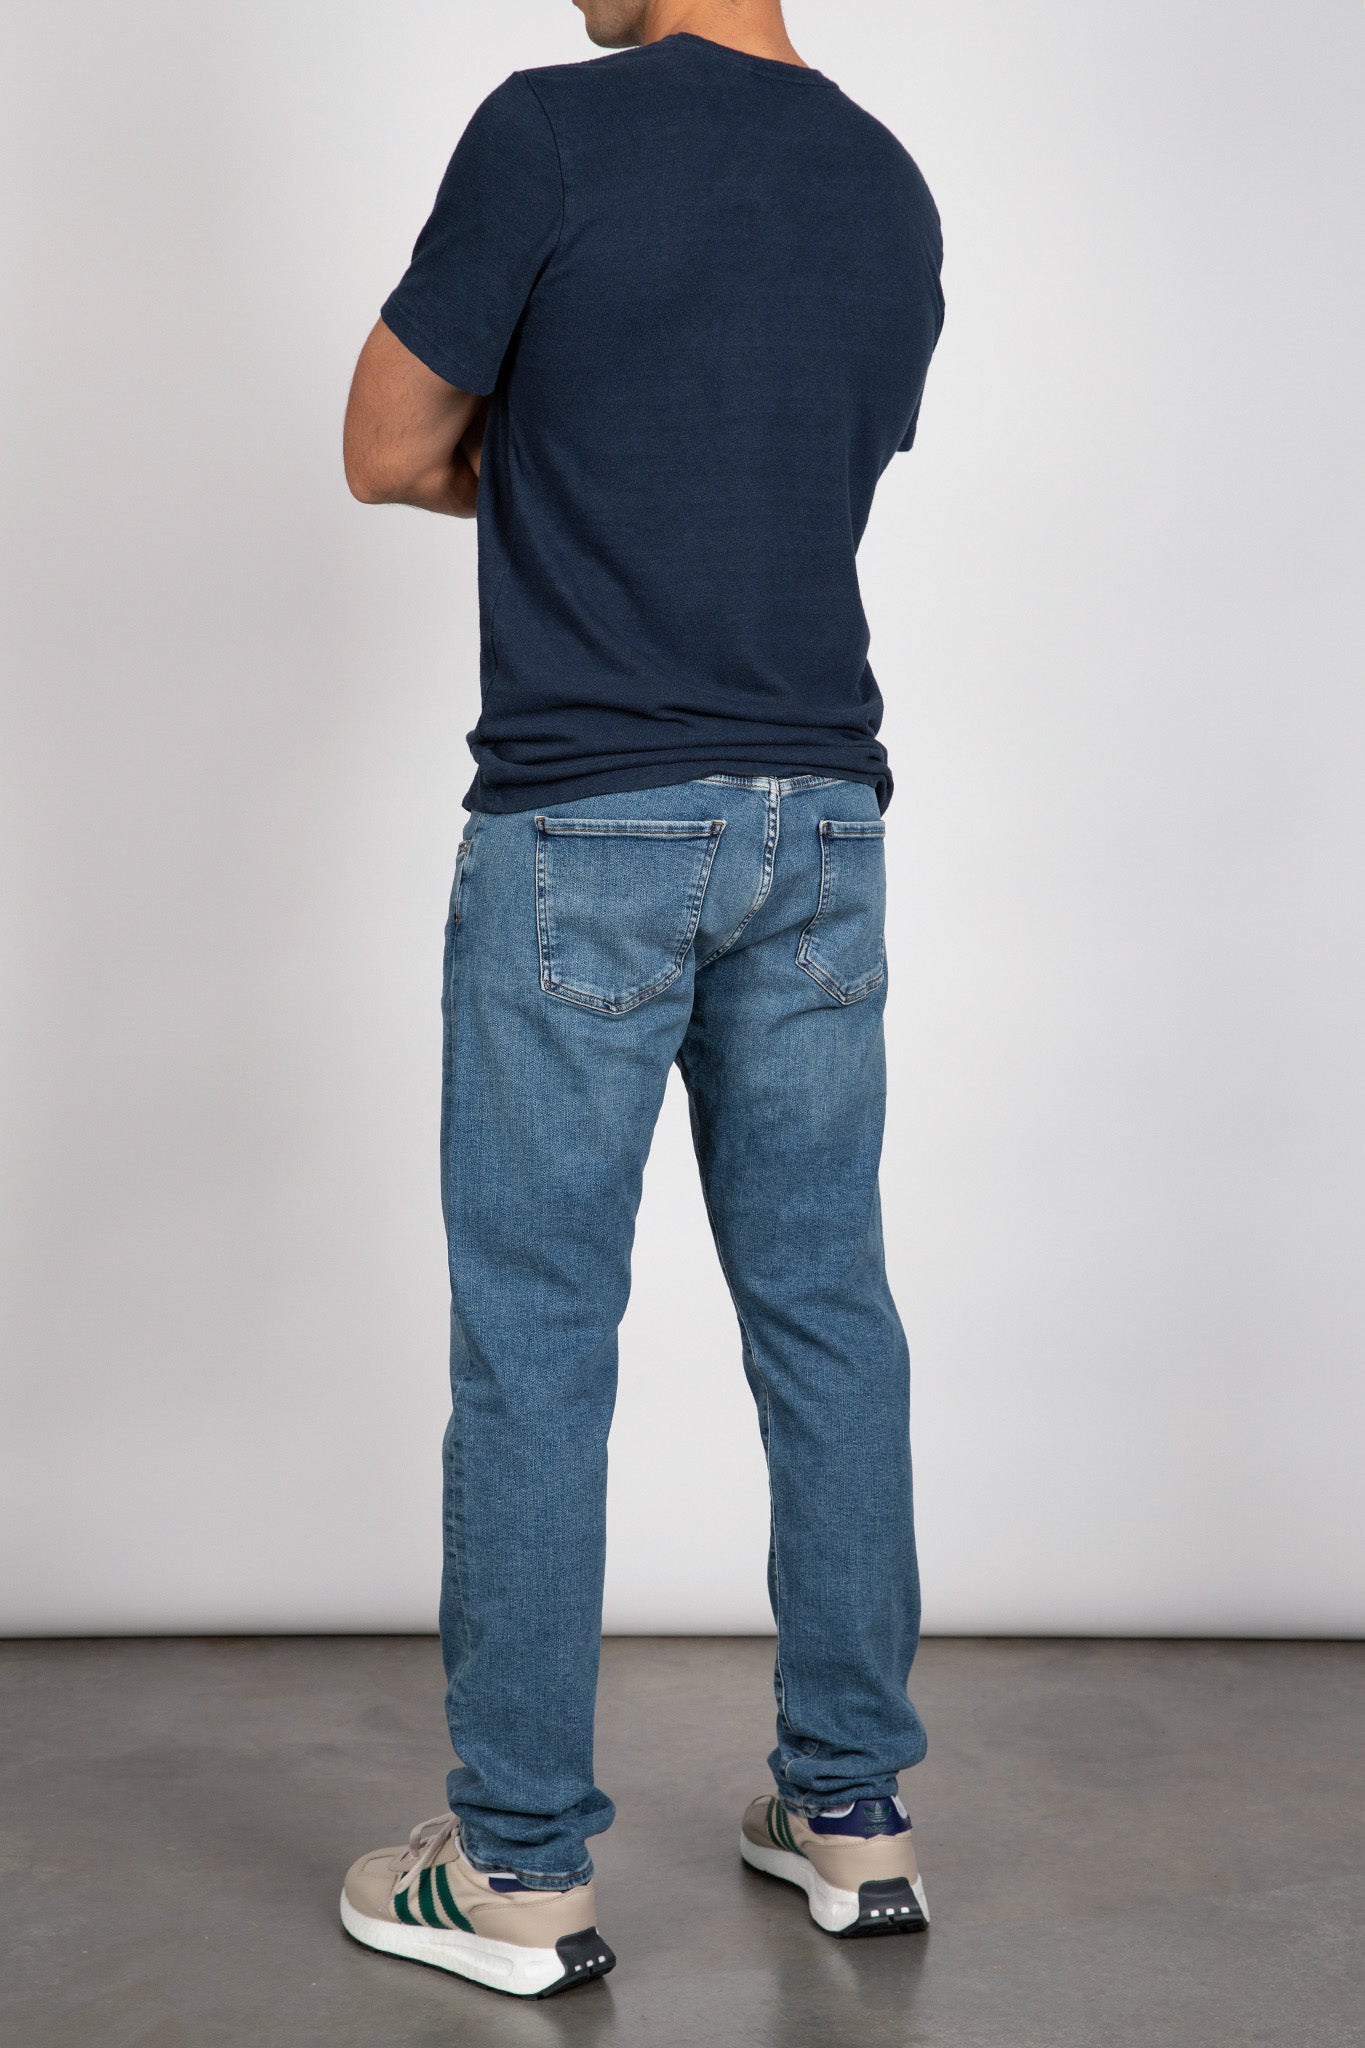 Adler Tapered Classic Perform Denim Citizens of Humanity   